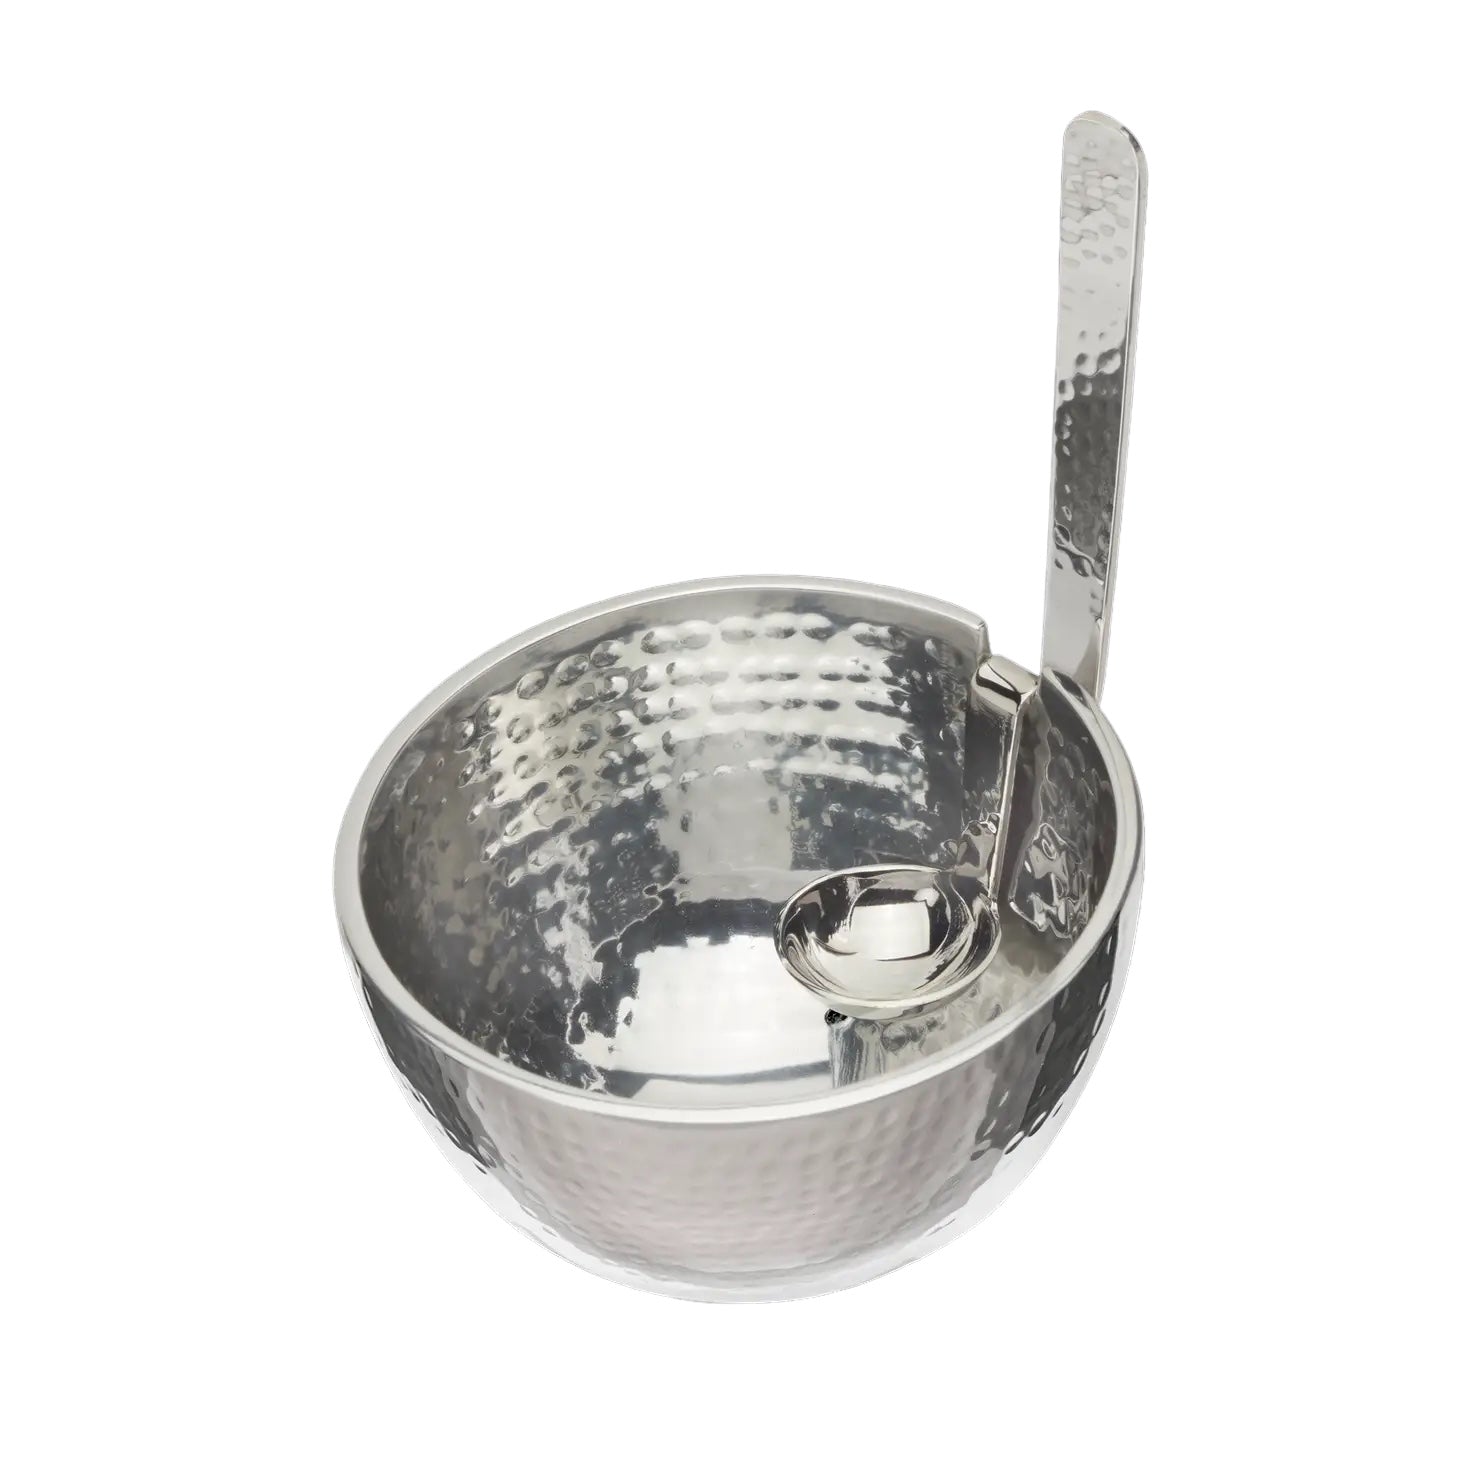 Hammered Silver Baby Benzy Bowl with Spoon